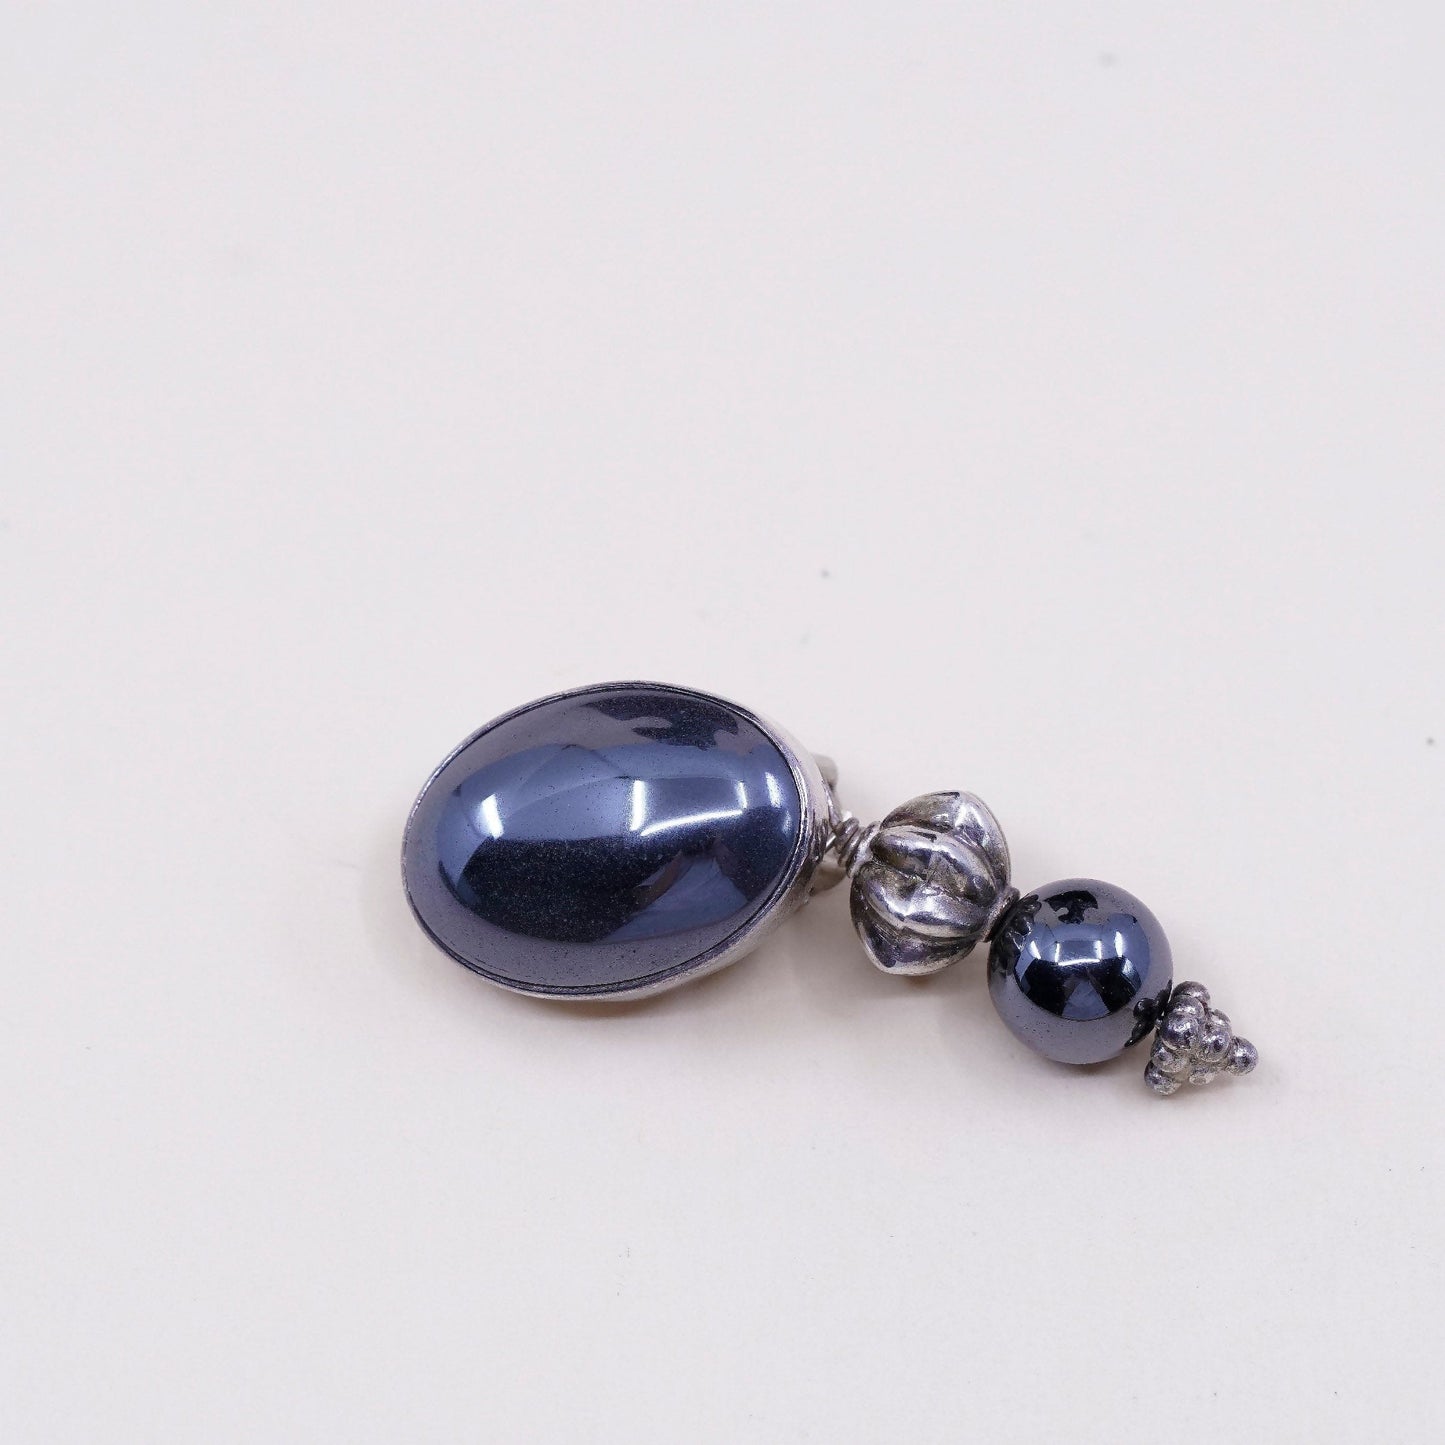 Vintage AIS 925 Sterling silver clip on earrings with hematite stone